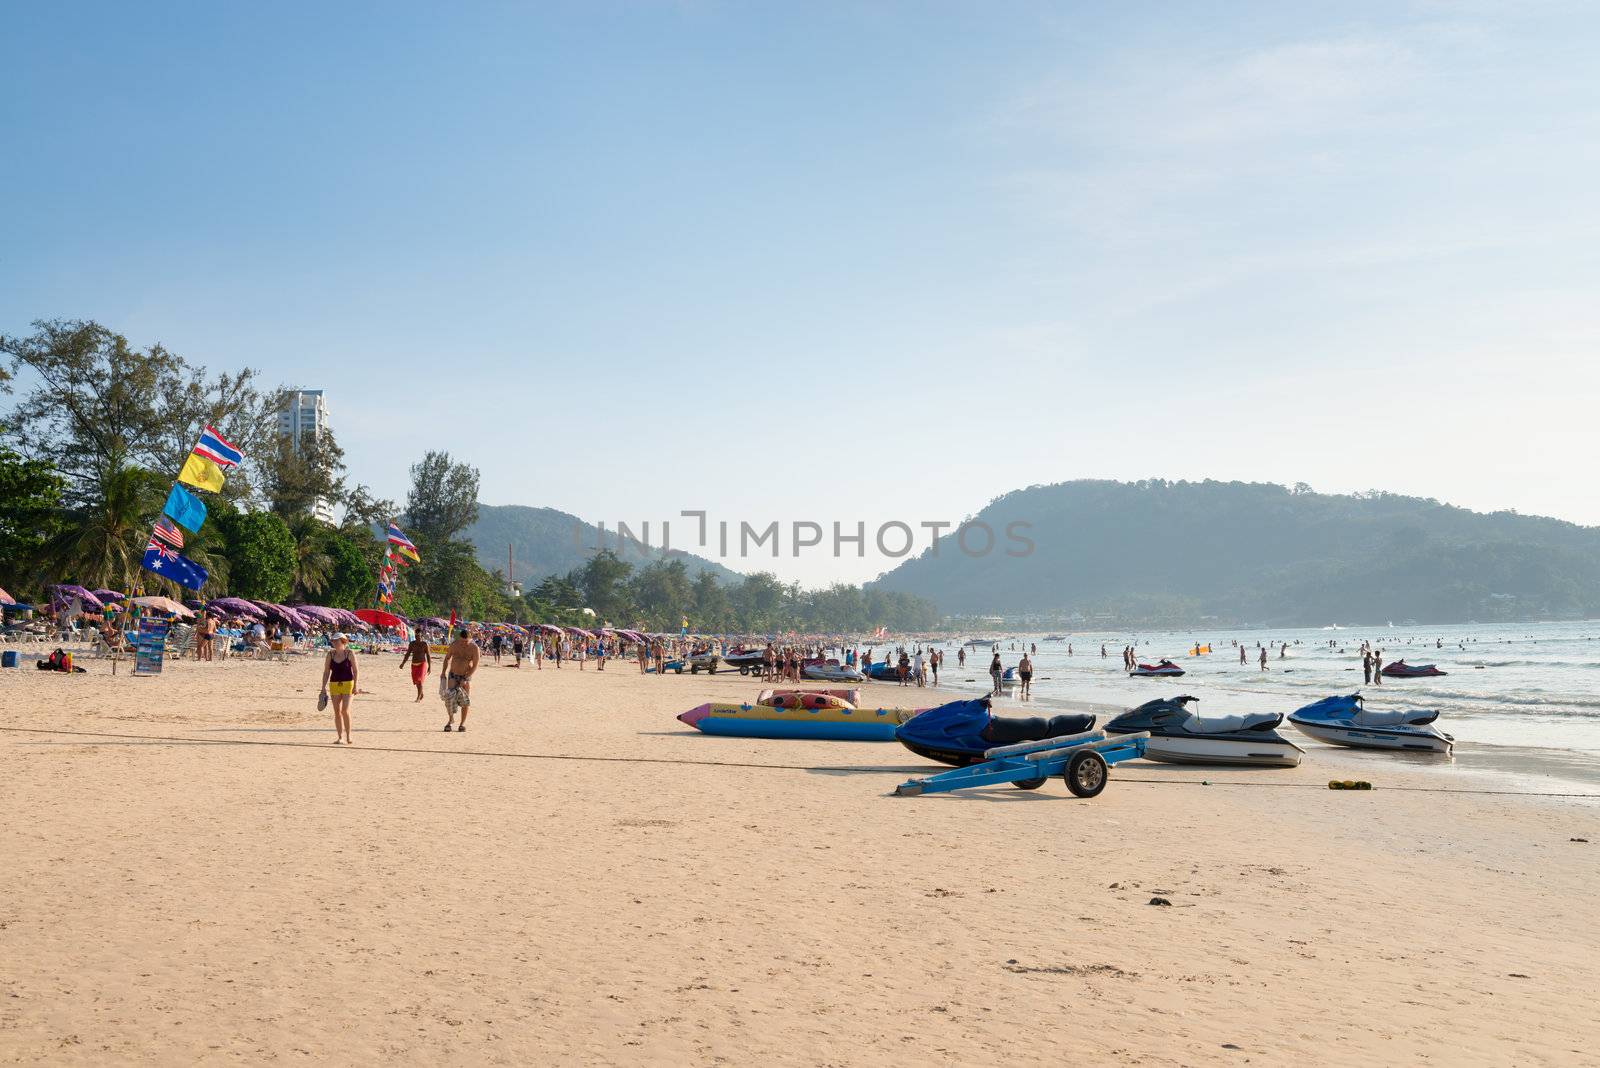 PHUKET, THAILAND - Jan 28: Patong beach with tourists and water scooters on Jan 28, 2013 in Phuket, Thailand. Phuket is a famous winter destination for thousands of tourists. 